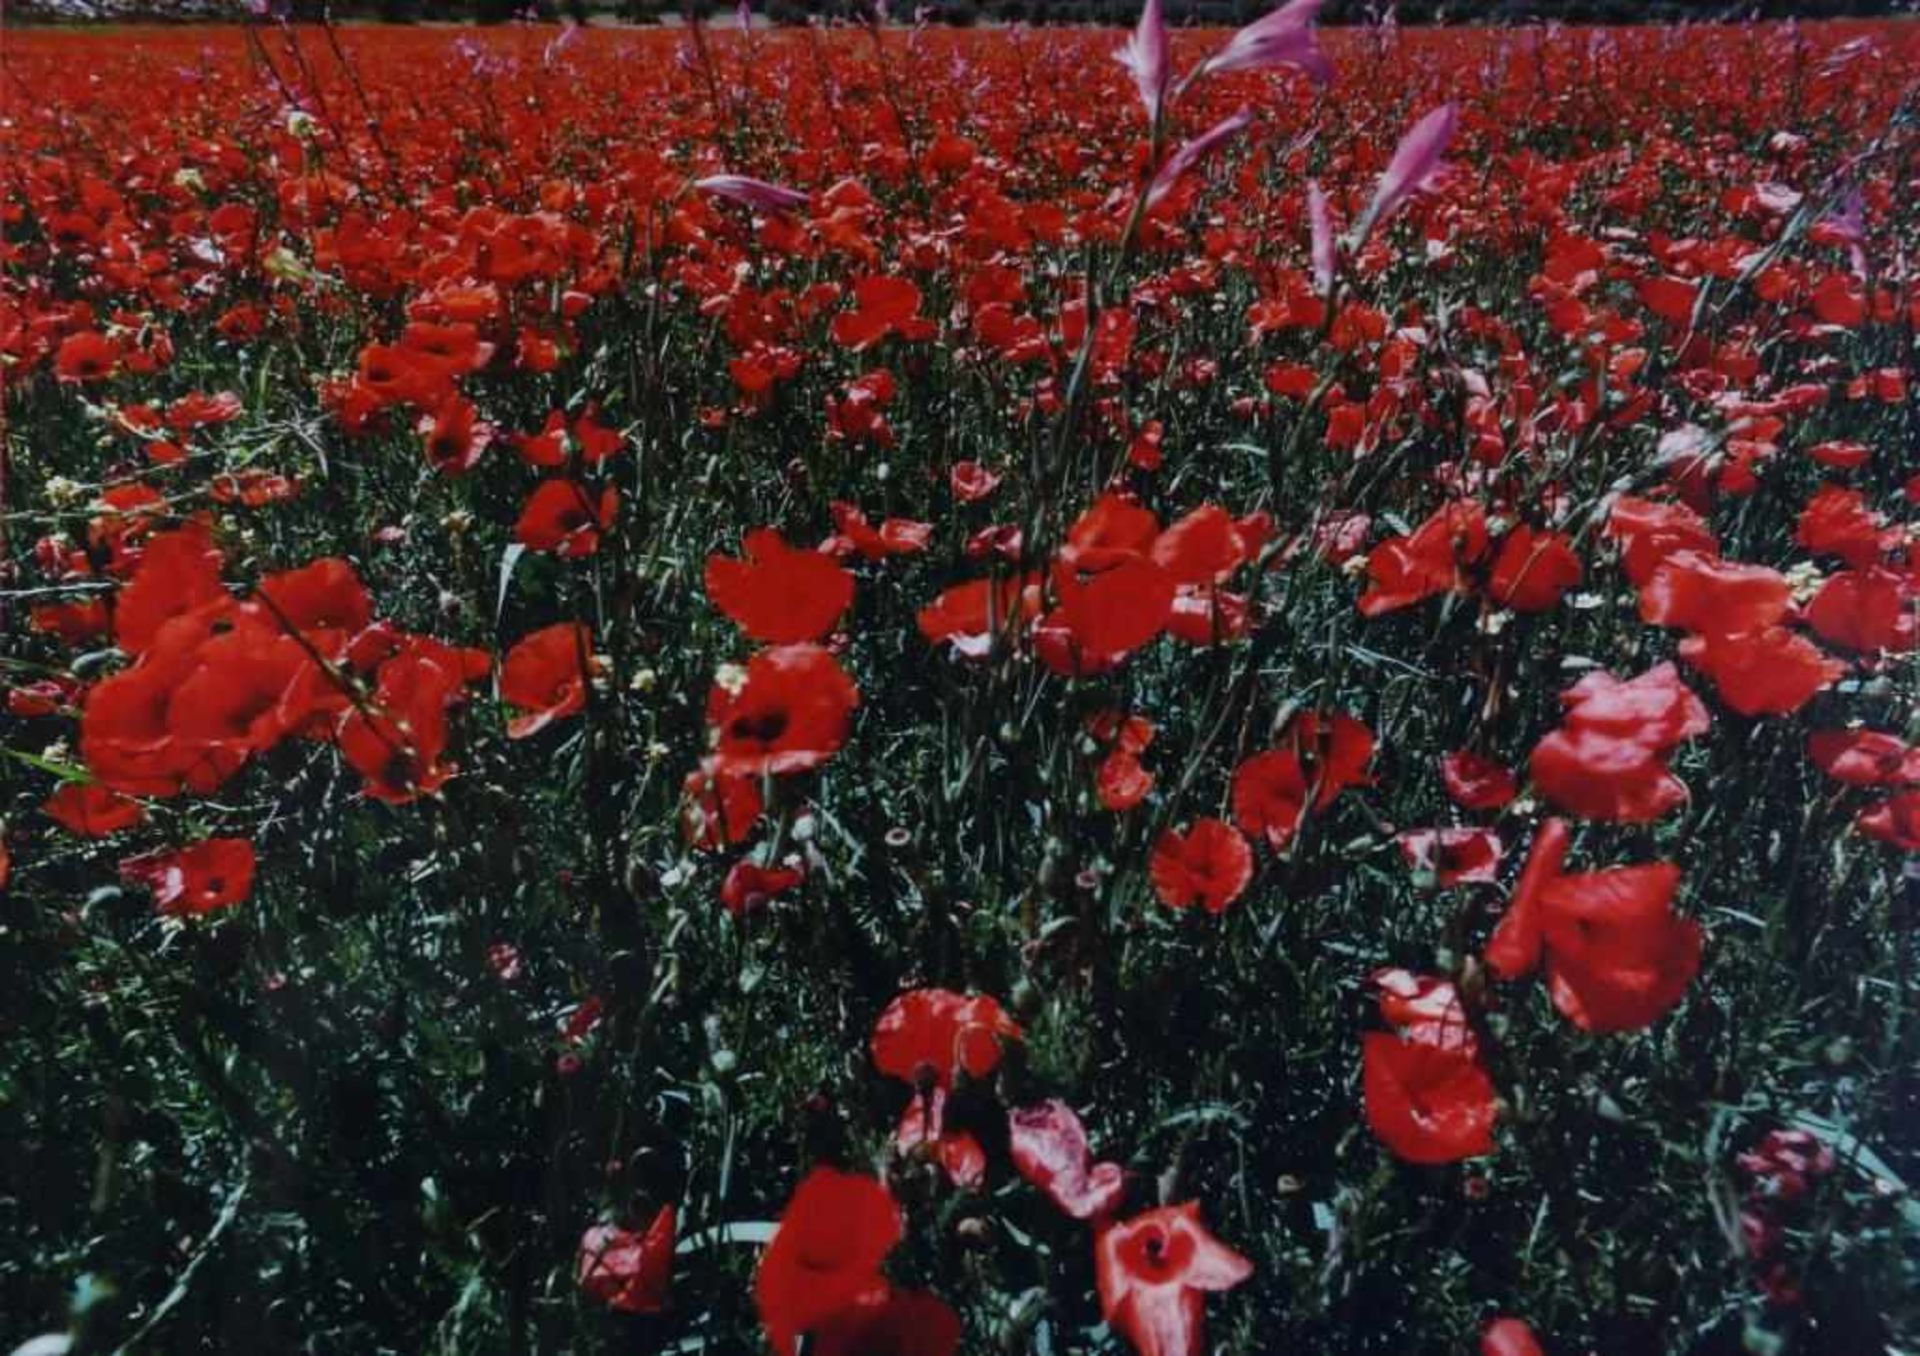 Huf, Paul (1924-2002), poppies, photograph 71 x 100 cm. From the series: Vincent van Gogh/Paul